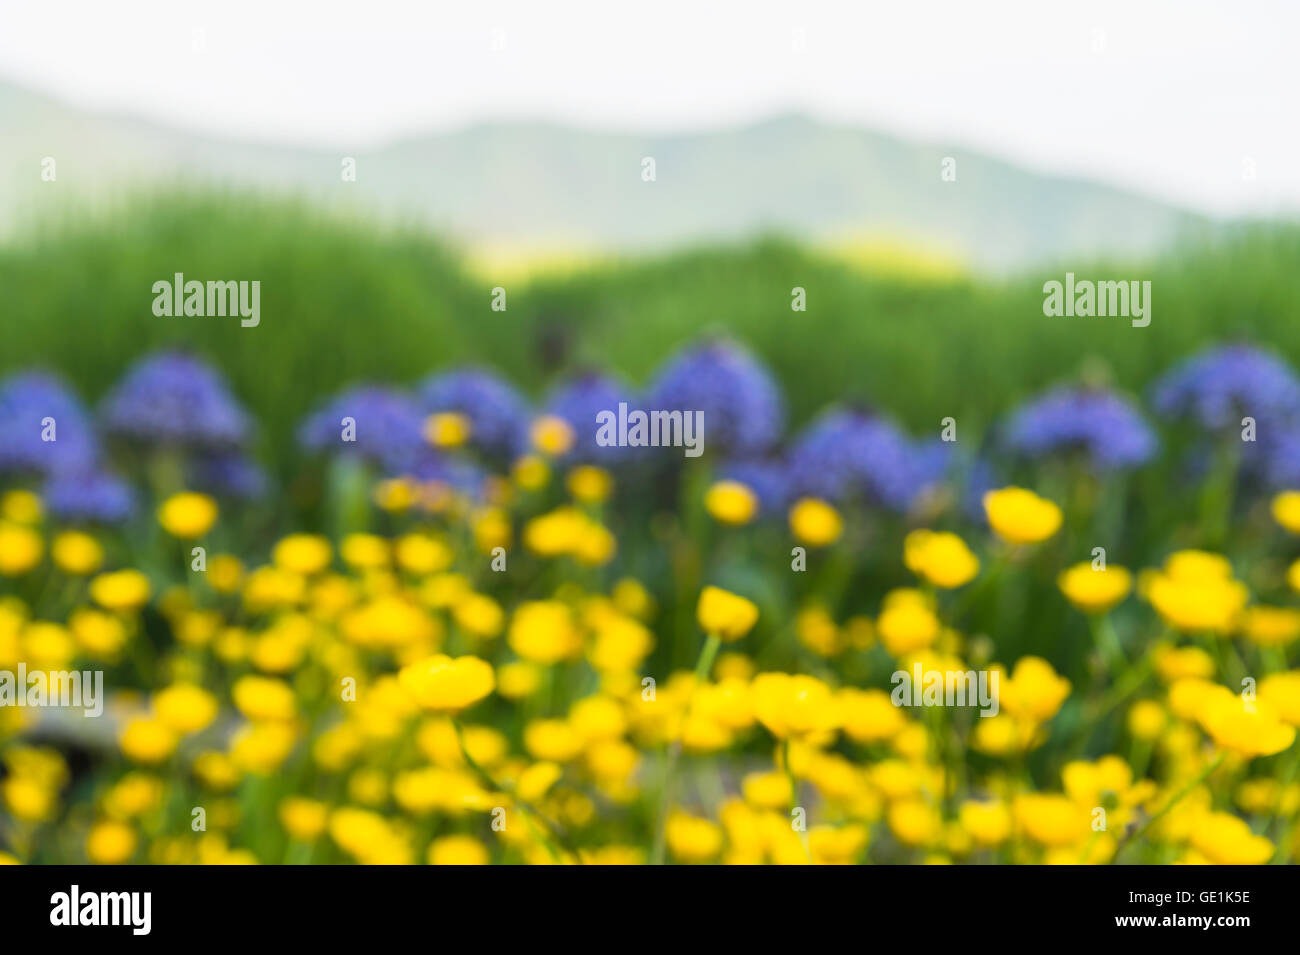 Blurred lawn of the buttercup flower, Japan Stock Photo